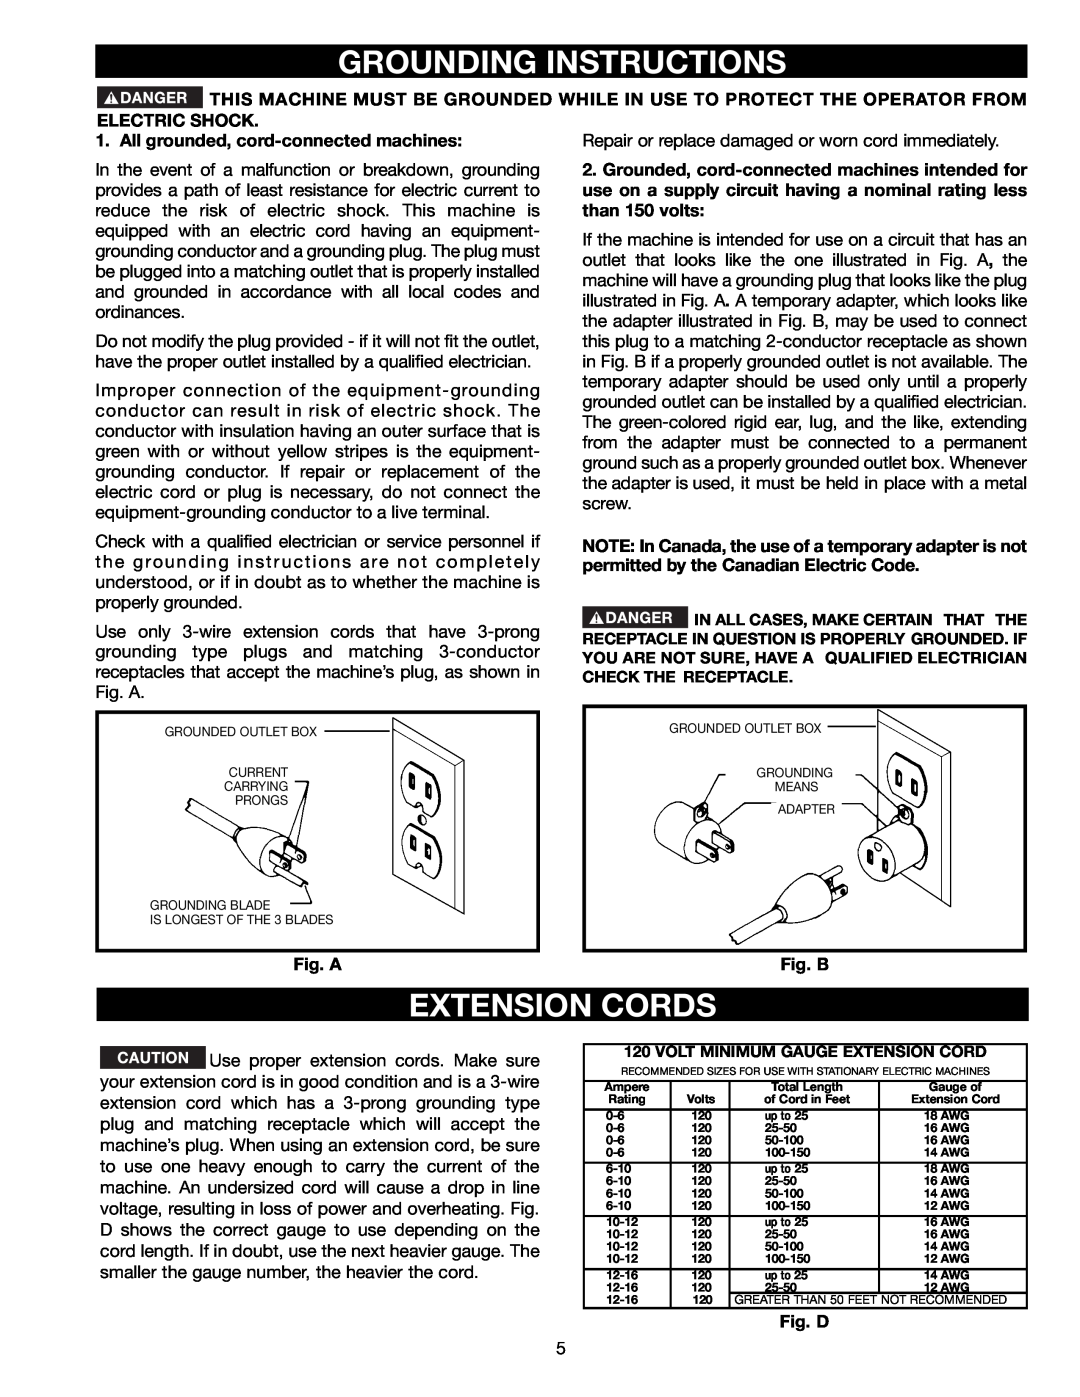 Delta BS150LS Grounding Instructions, Extension Cords, Electric Shock, All grounded, cord-connected machines, Fig. A 